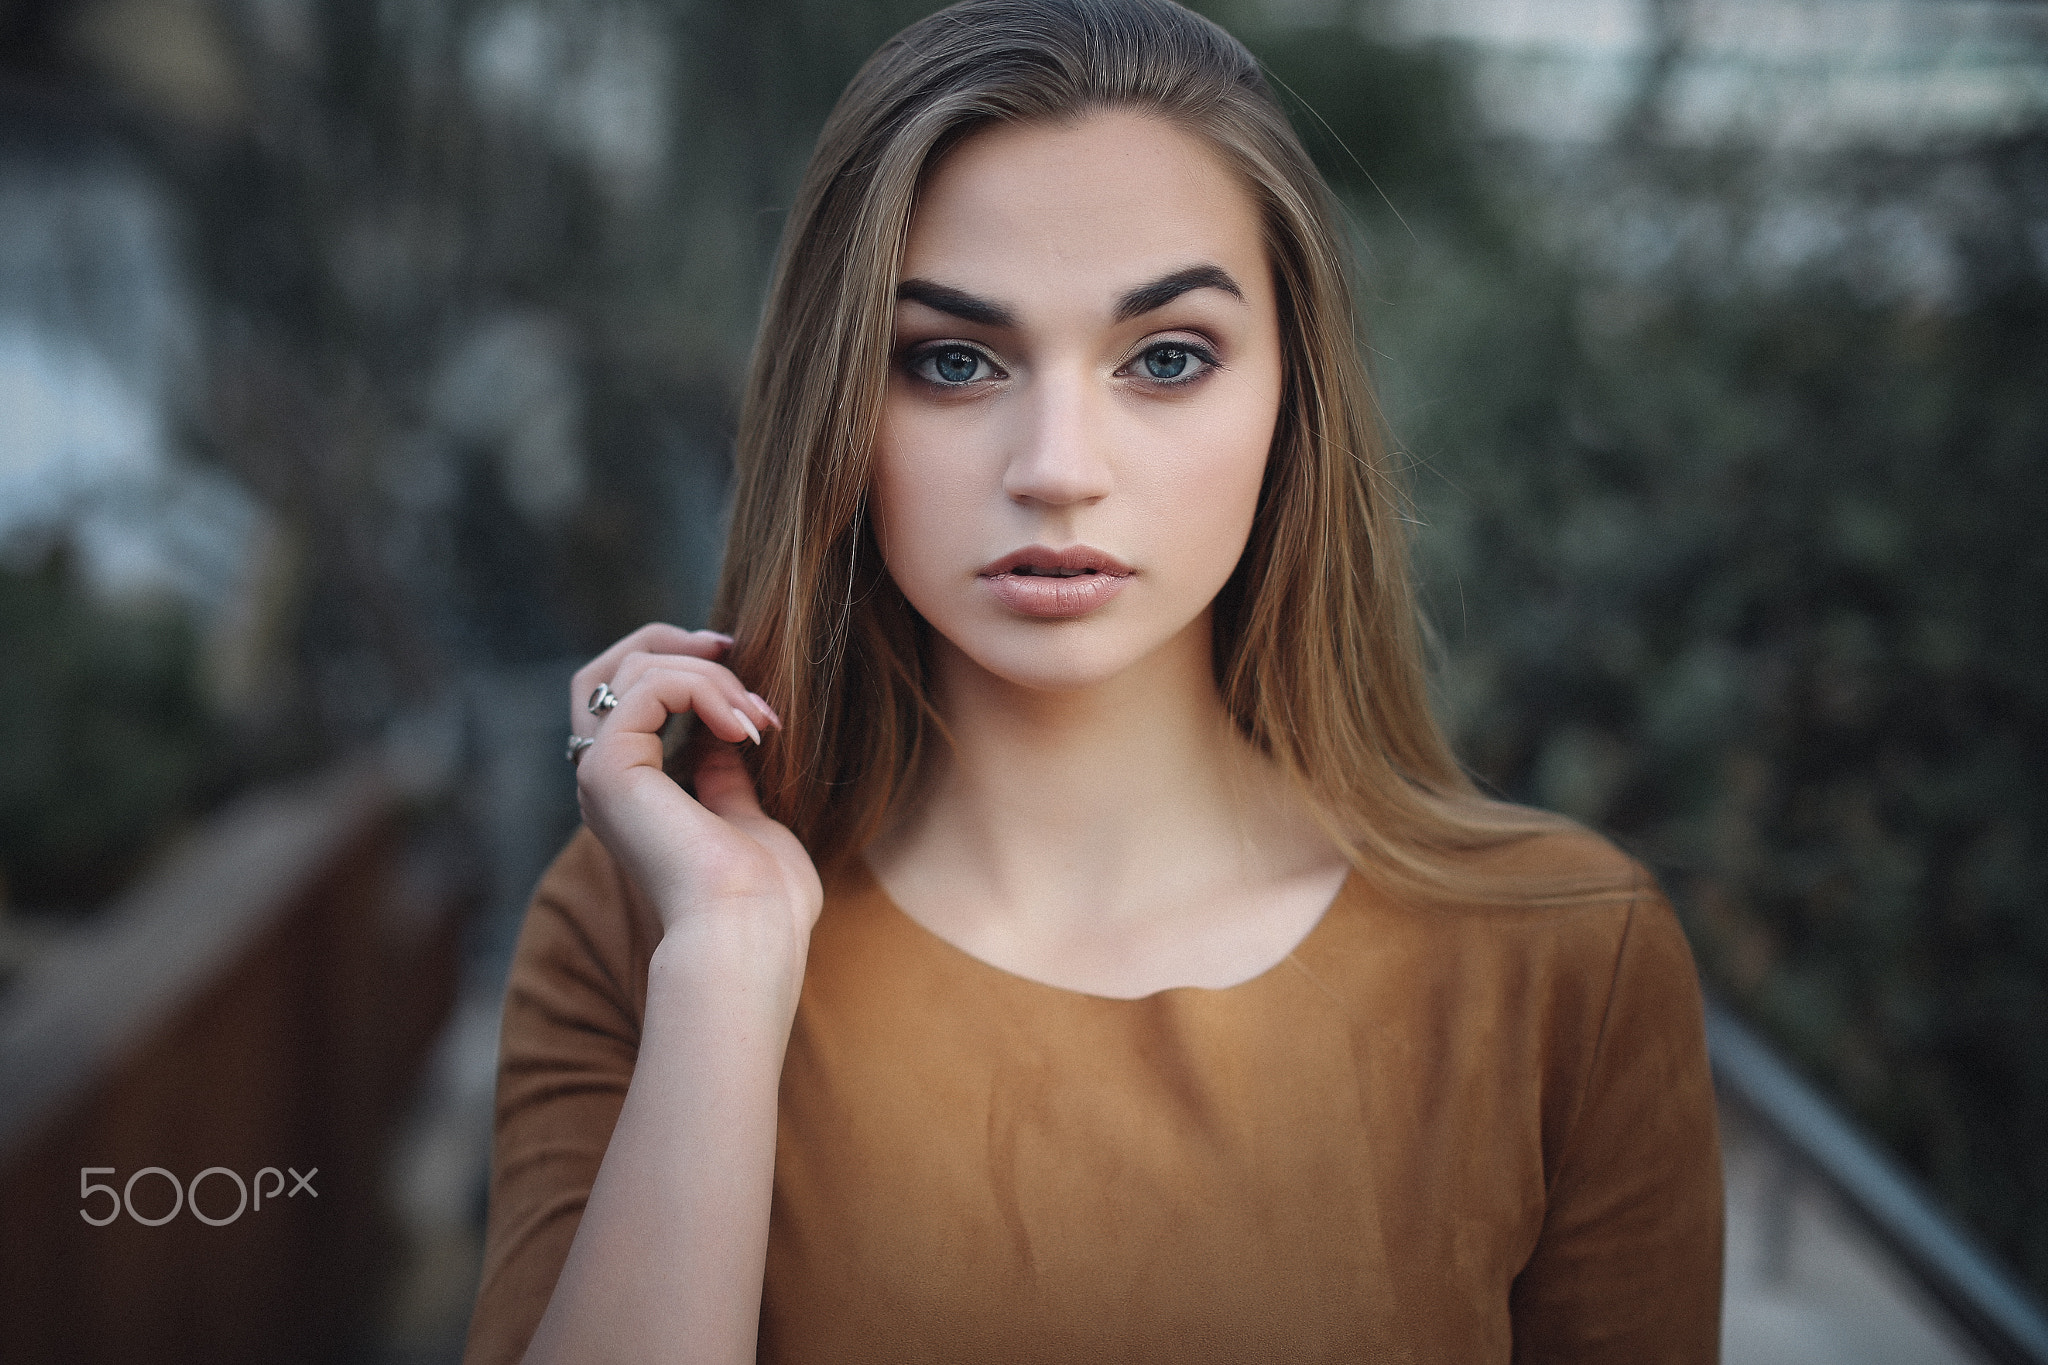 People 2048x1365 women portrait blue eyes depth of field face blonde 500px Shanti Vankerckhove makeup brown clothing one arm up Sonny Bui model parted lips women outdoors watermarked closeup